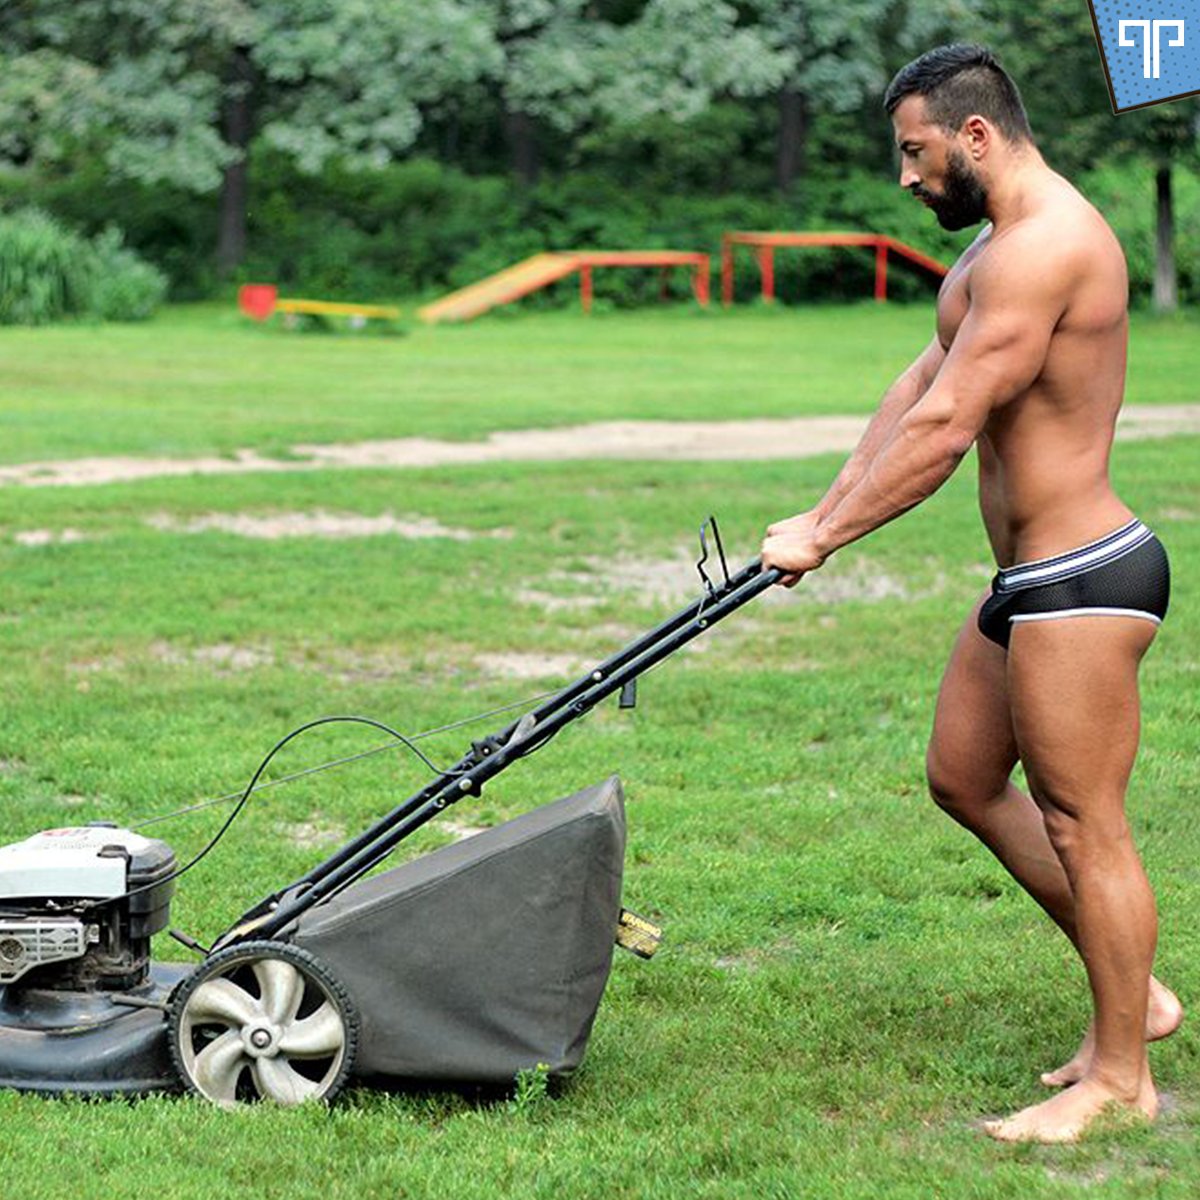 “Do you need help to mow the lawn?

